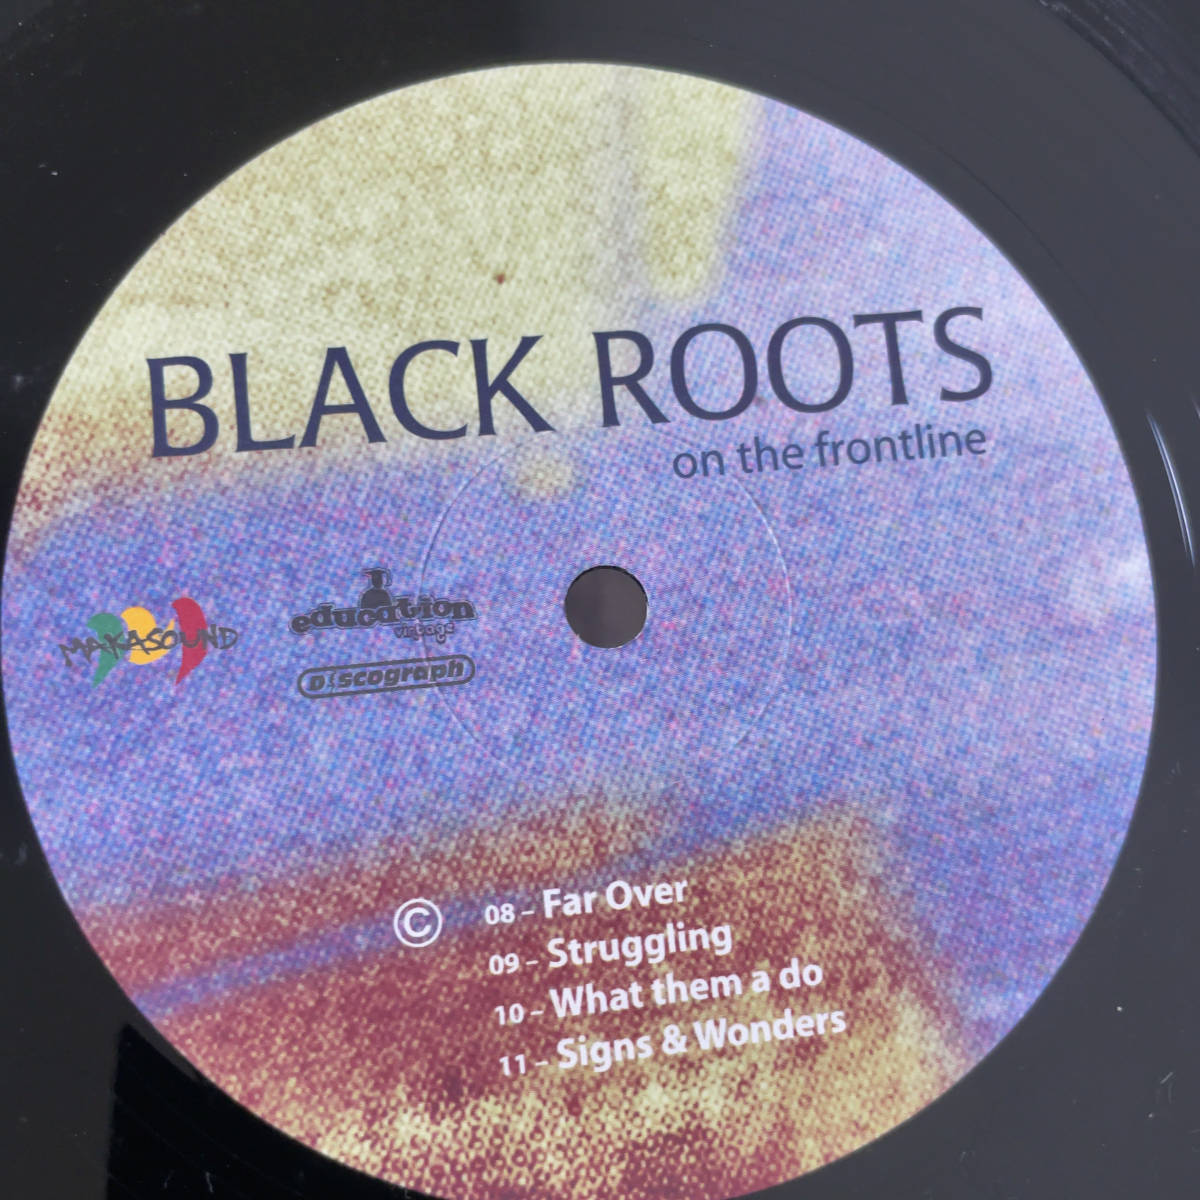 Black Roots On The Frontlineの画像5